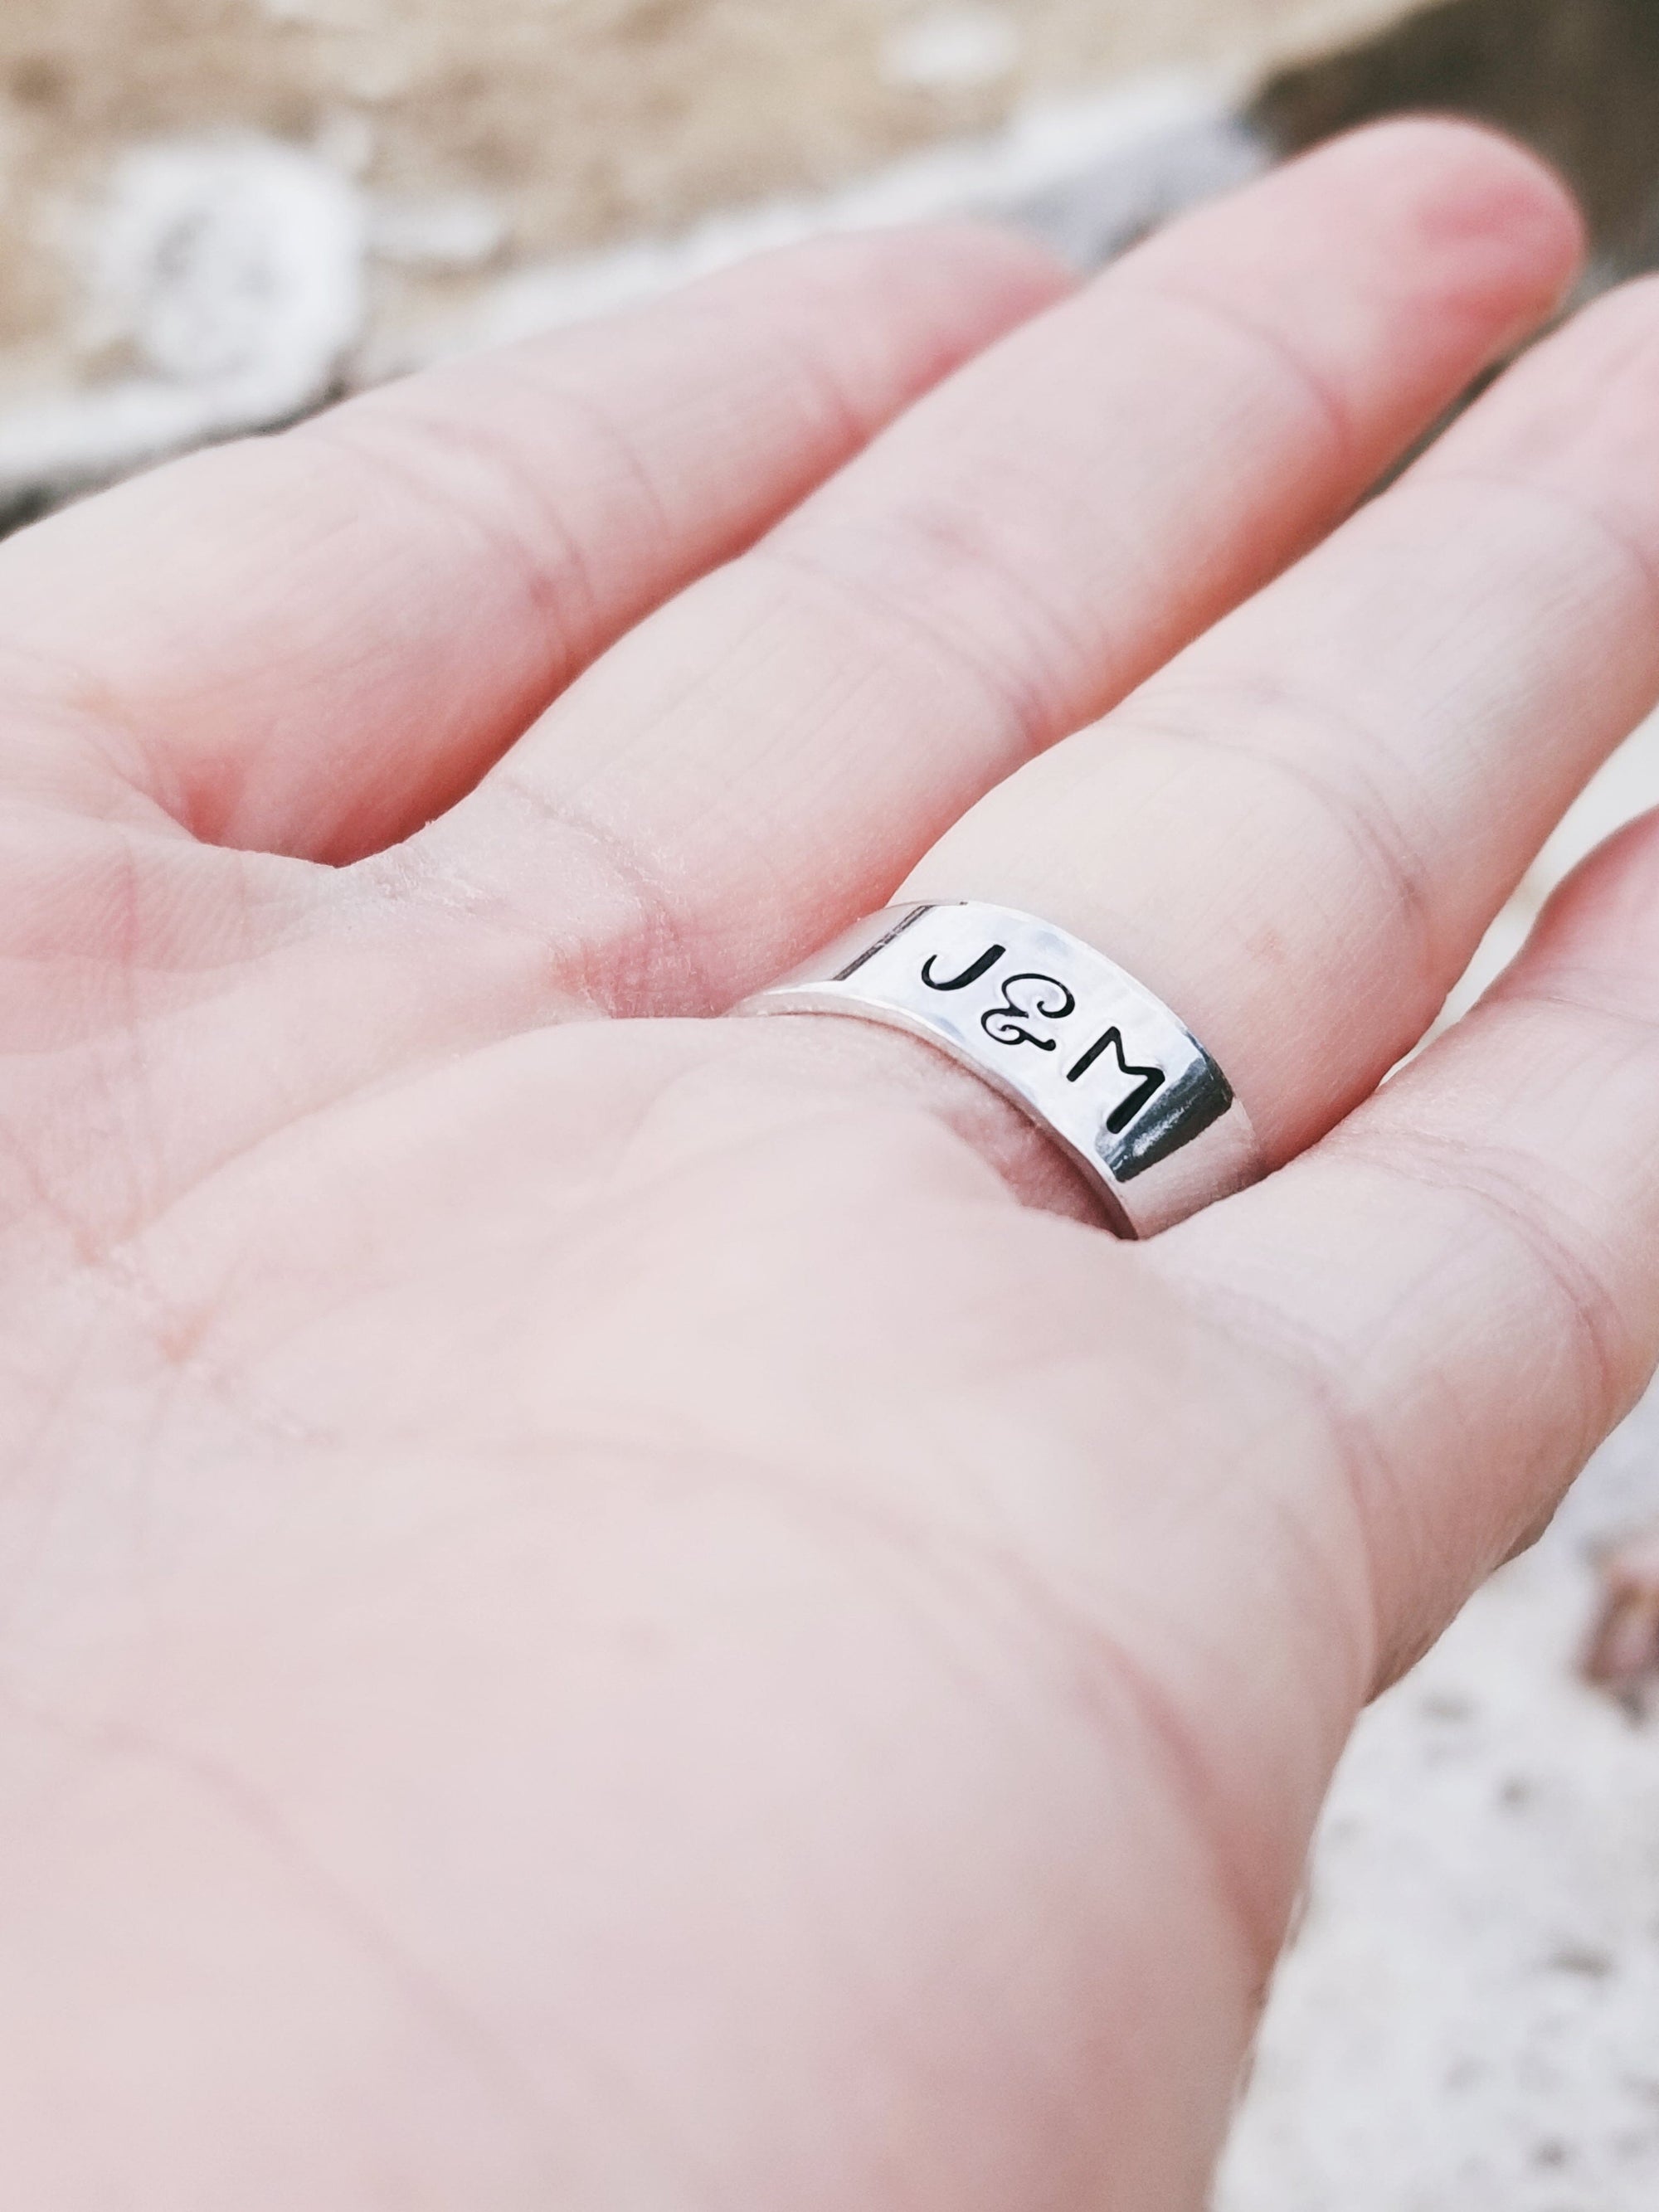 Paper Airplane Wrapped Ring, Personalize Jewelry, Stamped Ring, Silver Personalize Ring, Custom rings, Long Distance gift, Anniversary Gift